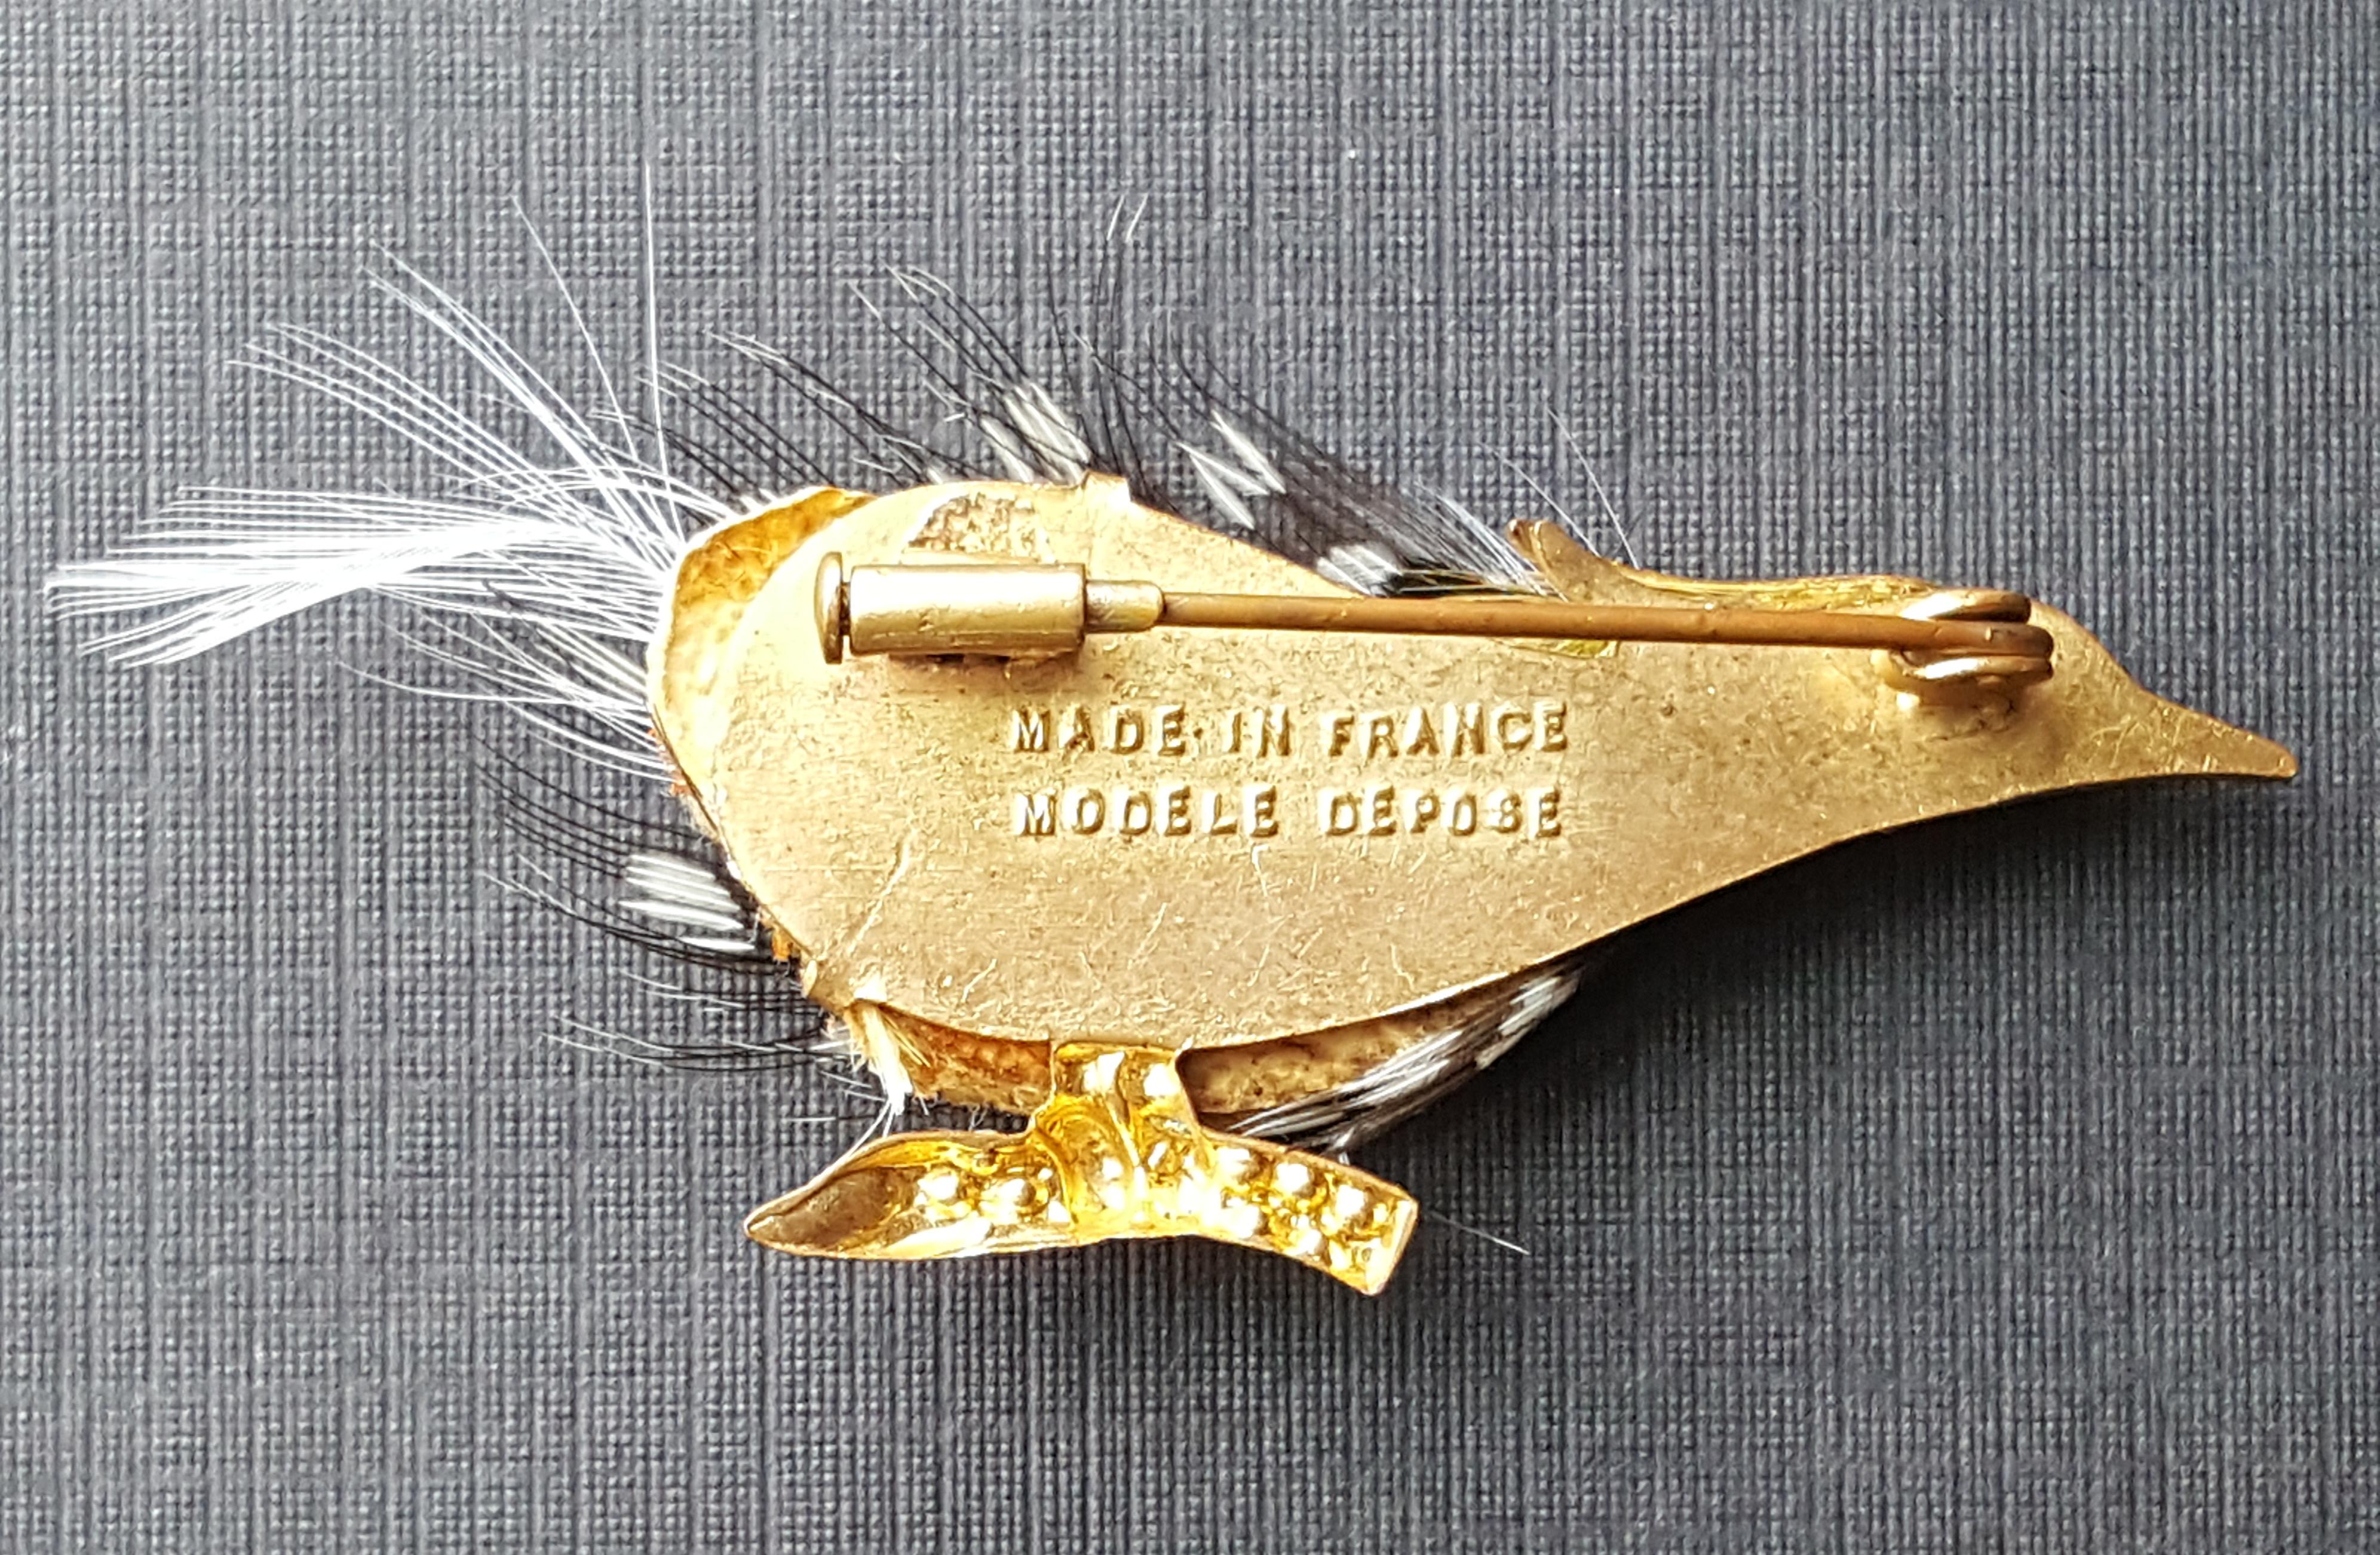 1938 ElsaSchiaparelli CouturePagan DeposeFrance FeatherCrystalGold Bird Brooch In Good Condition For Sale In Chicago, IL